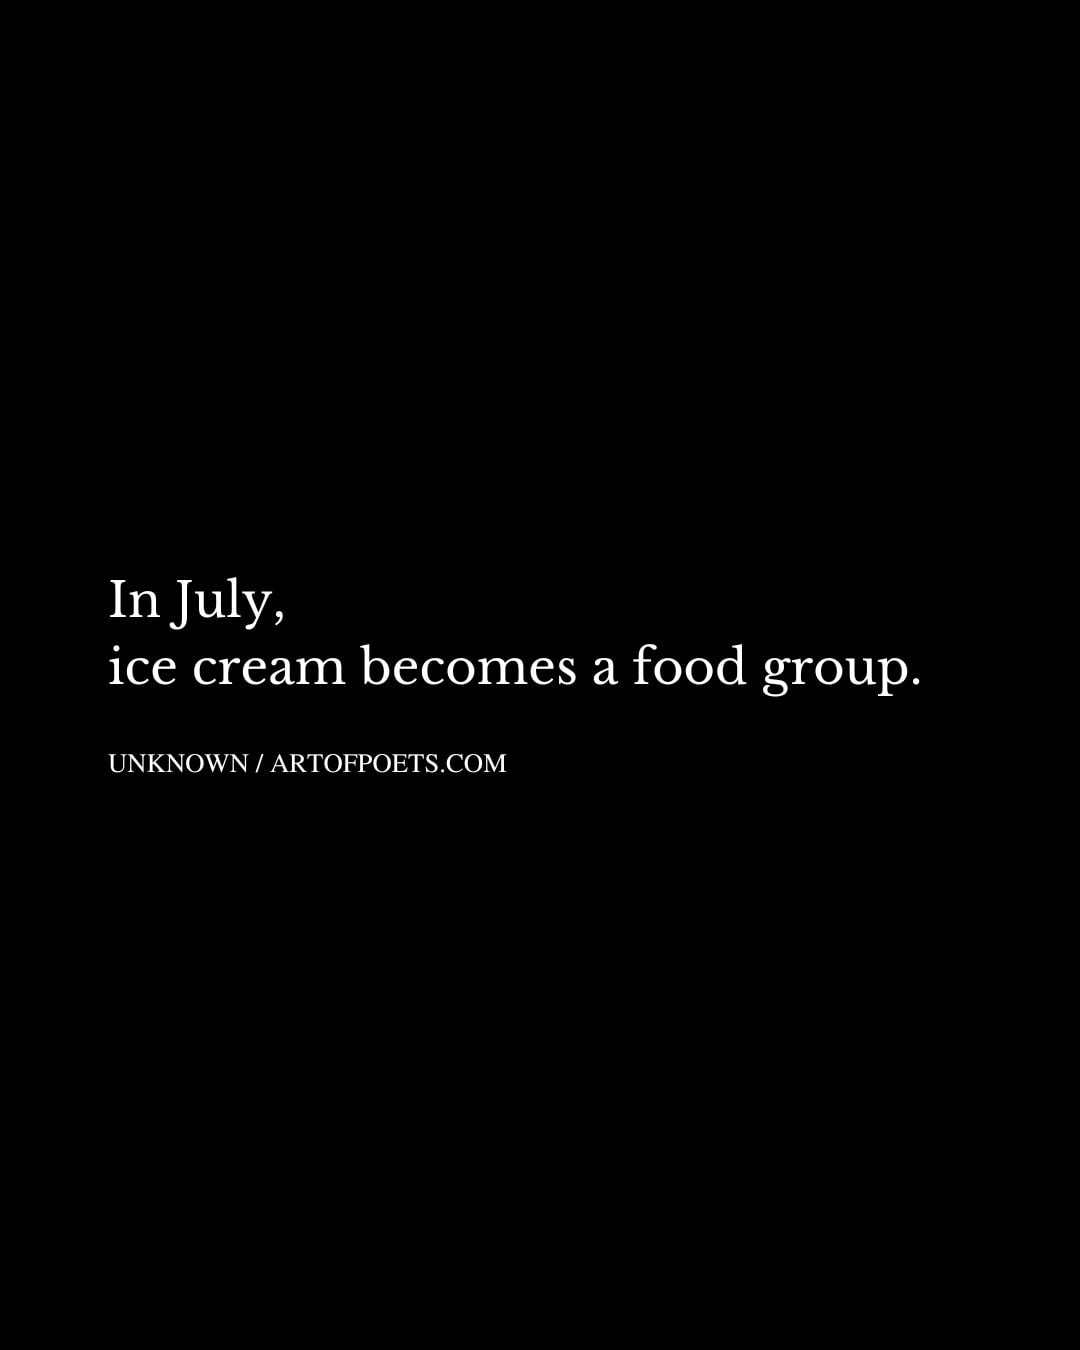 In July ice cream becomes a food group